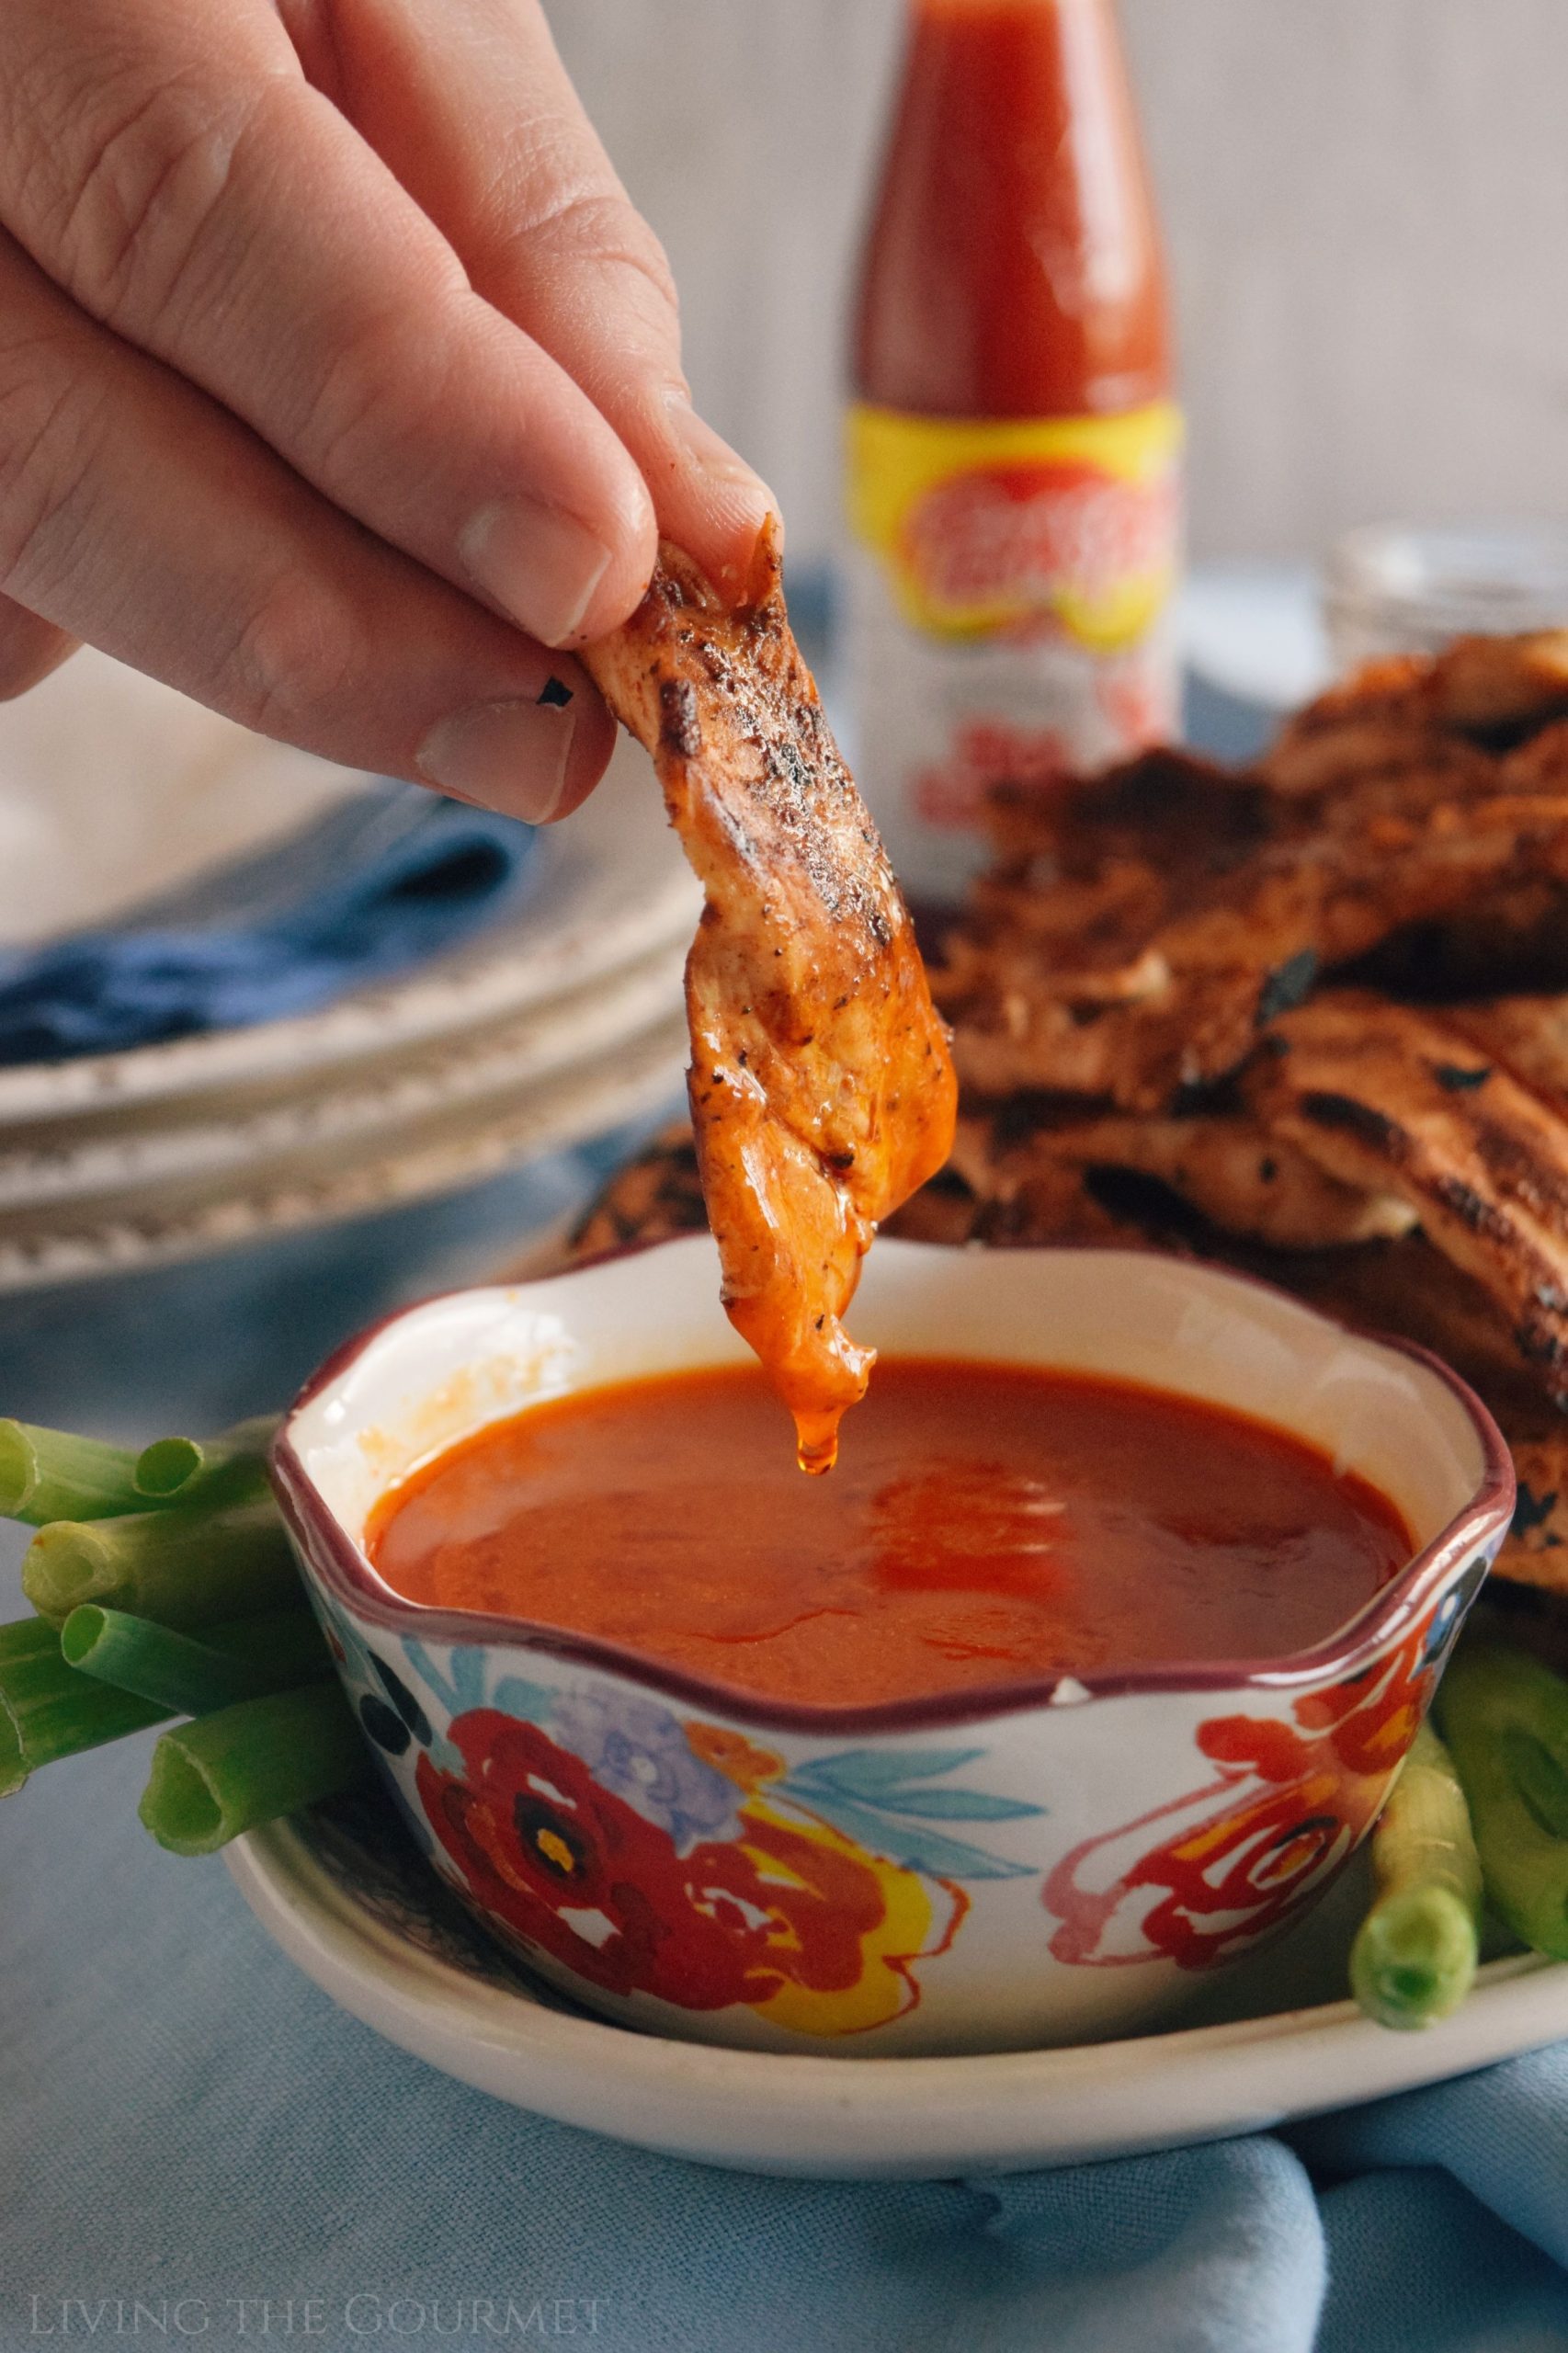 Spicy Chicken Strips with Buffalo Dipping Sauce - Living The Gourmet